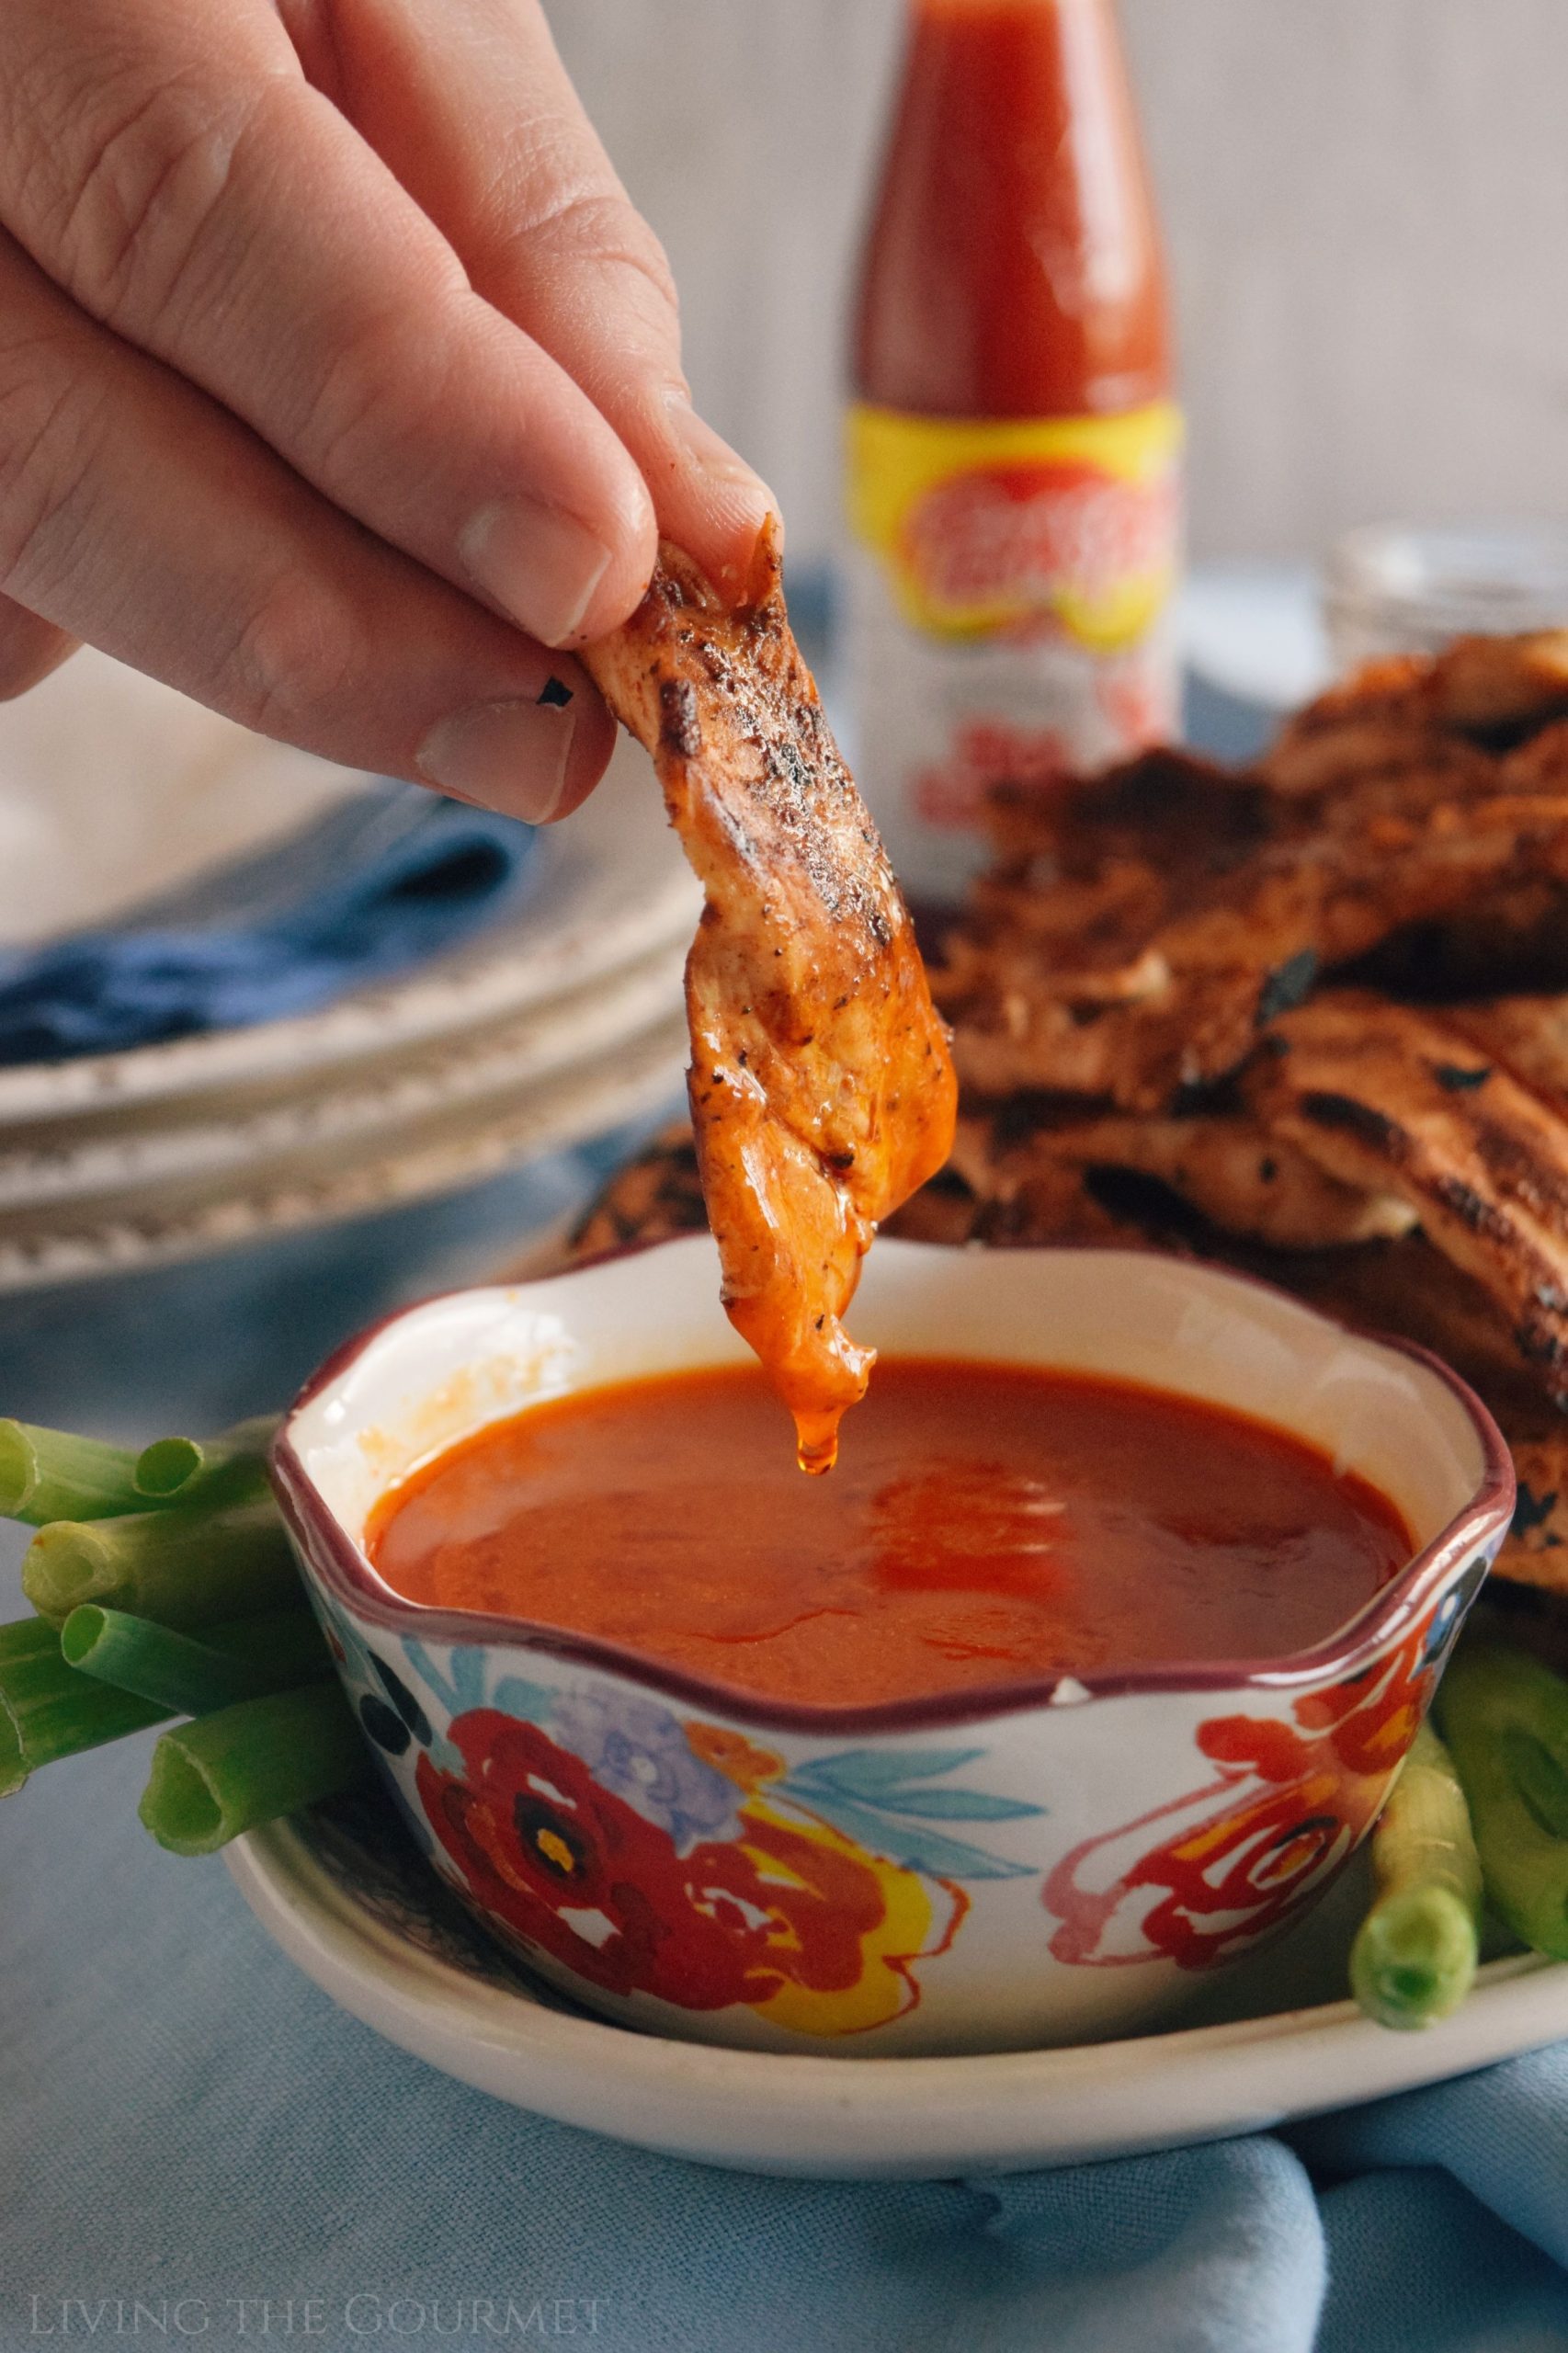 Spicy Chicken Strips with Buffalo Dipping Sauce - Living The Gourmet